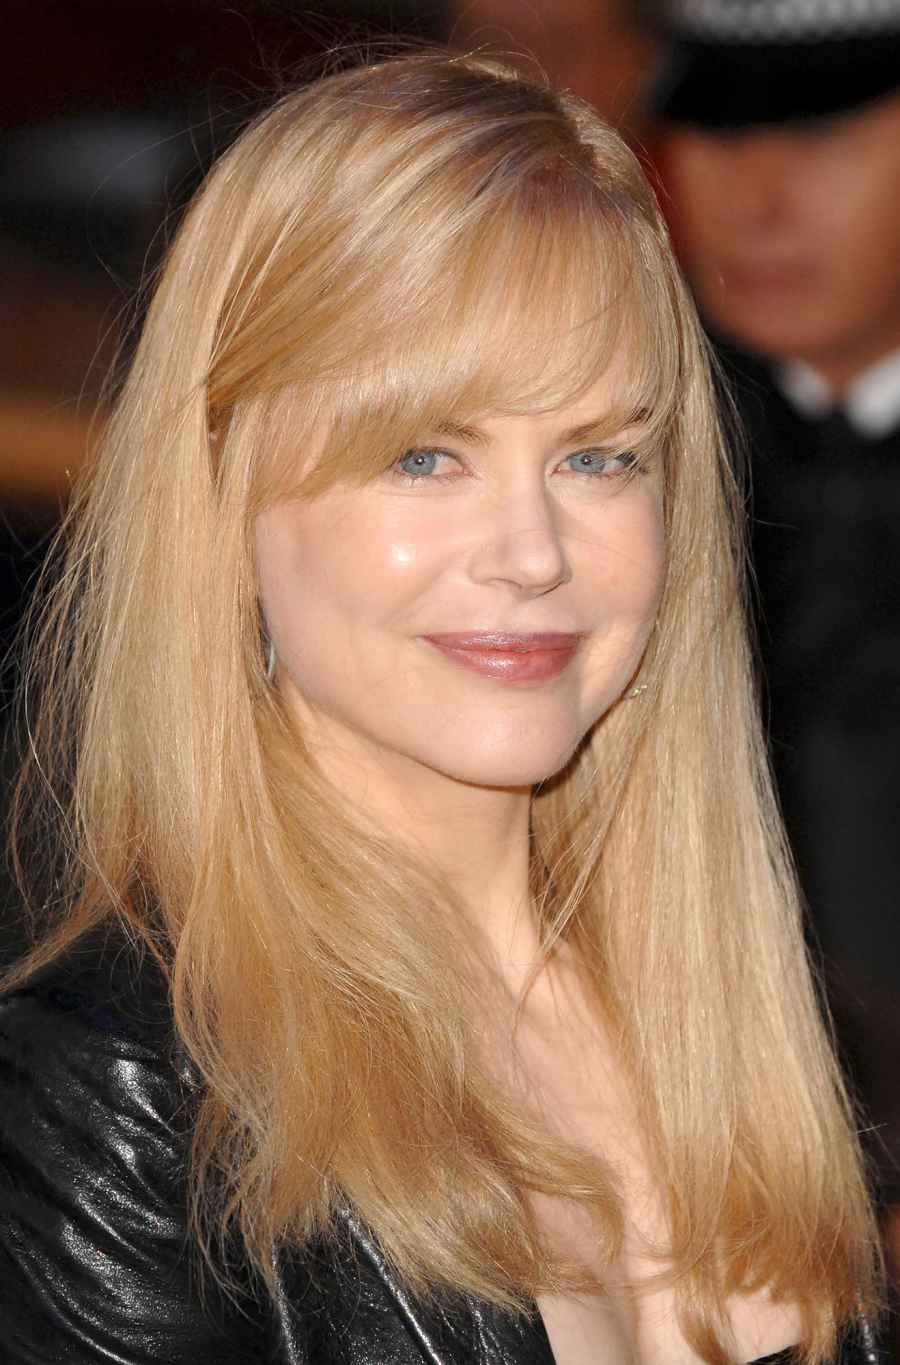 Nicole Kidman at 44: How Her Face Has Changed 2006